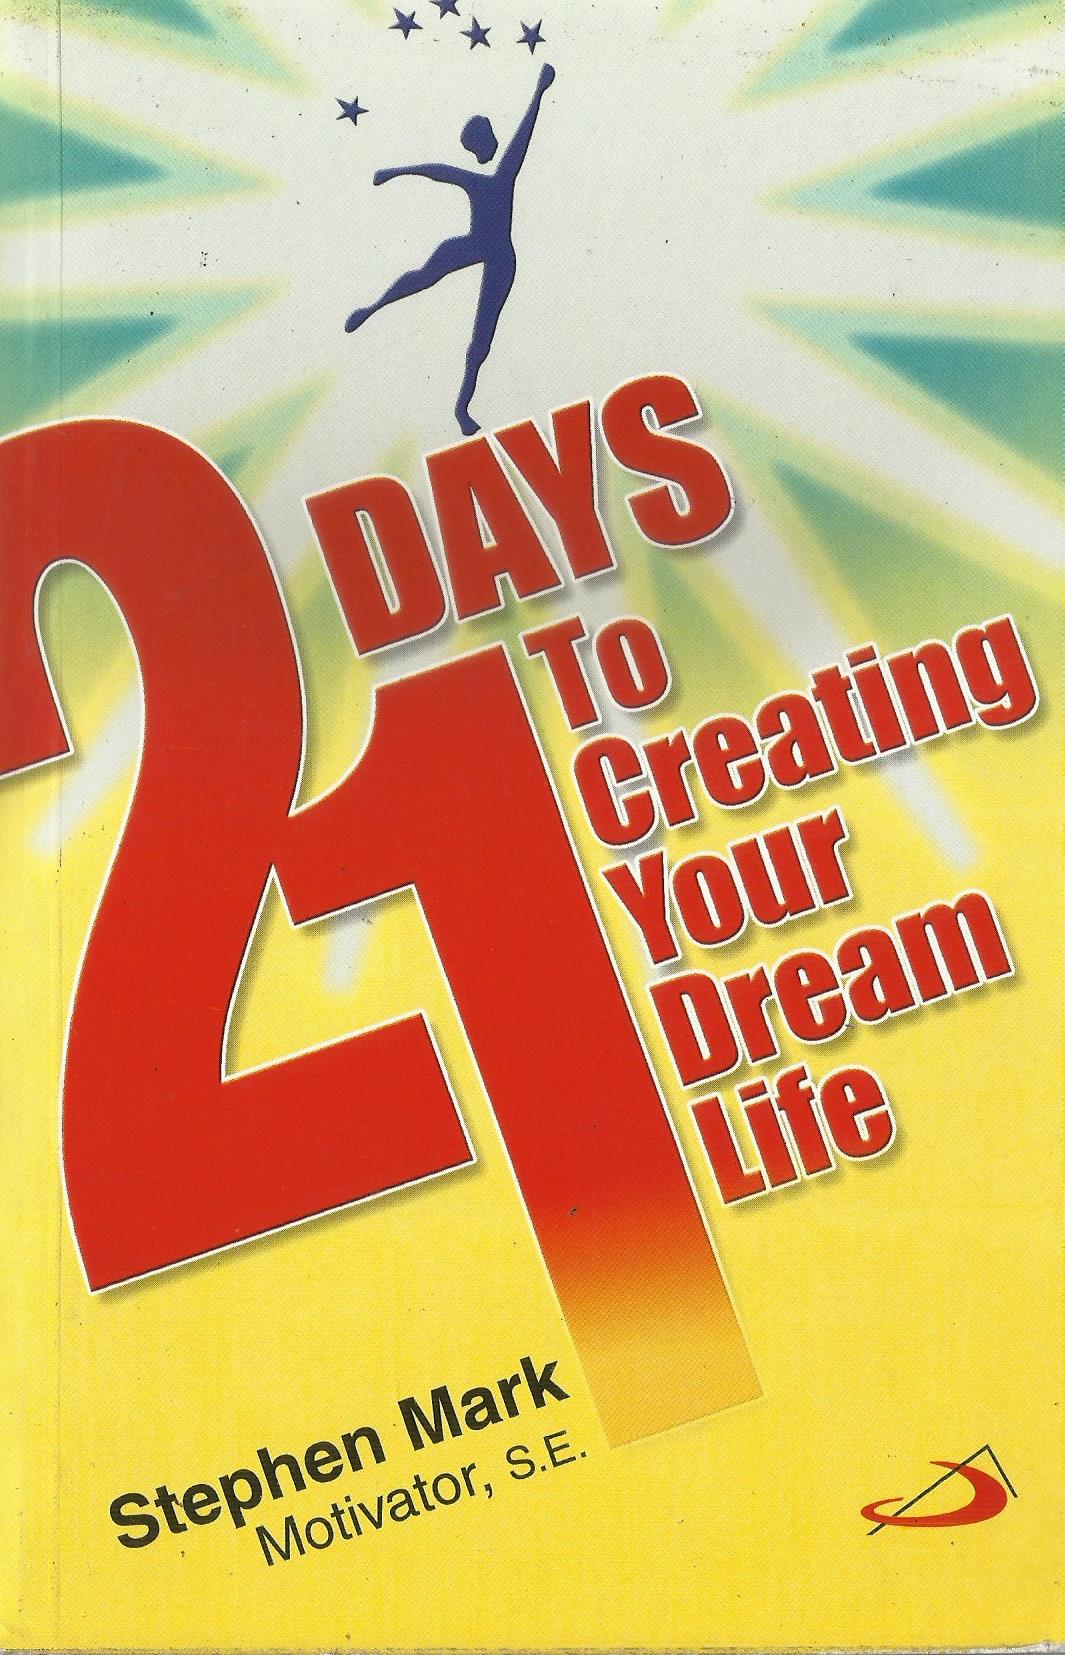 21 DAYS TO CREATING YOUR DREAM LIFE - sophiabuy